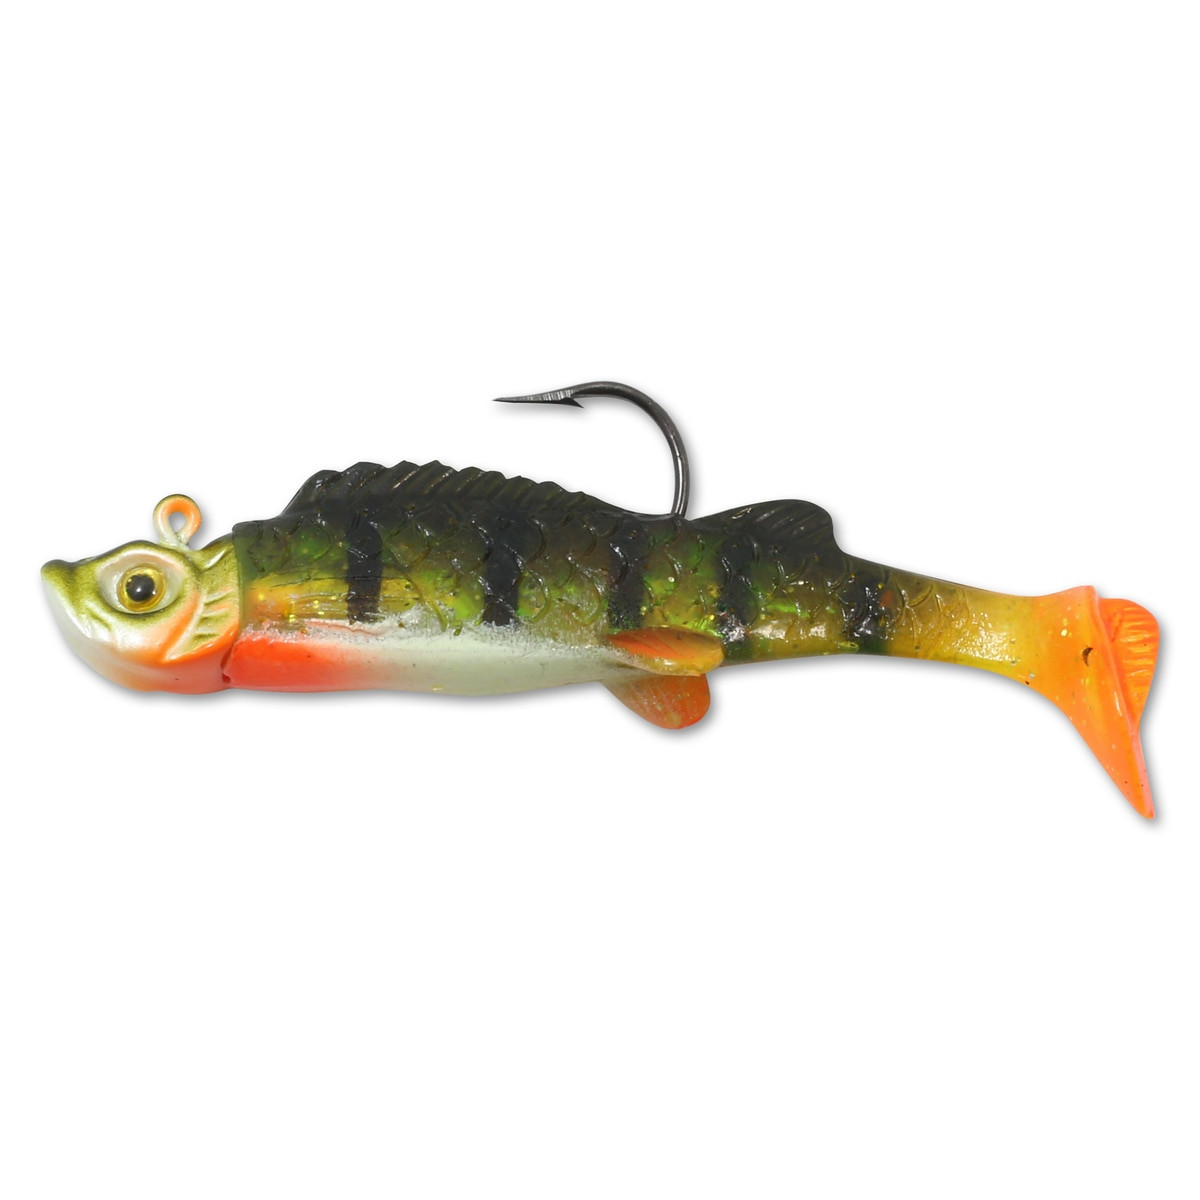 Freedom Tackle Minnow Spoon Silver ; 2 1/4 in.